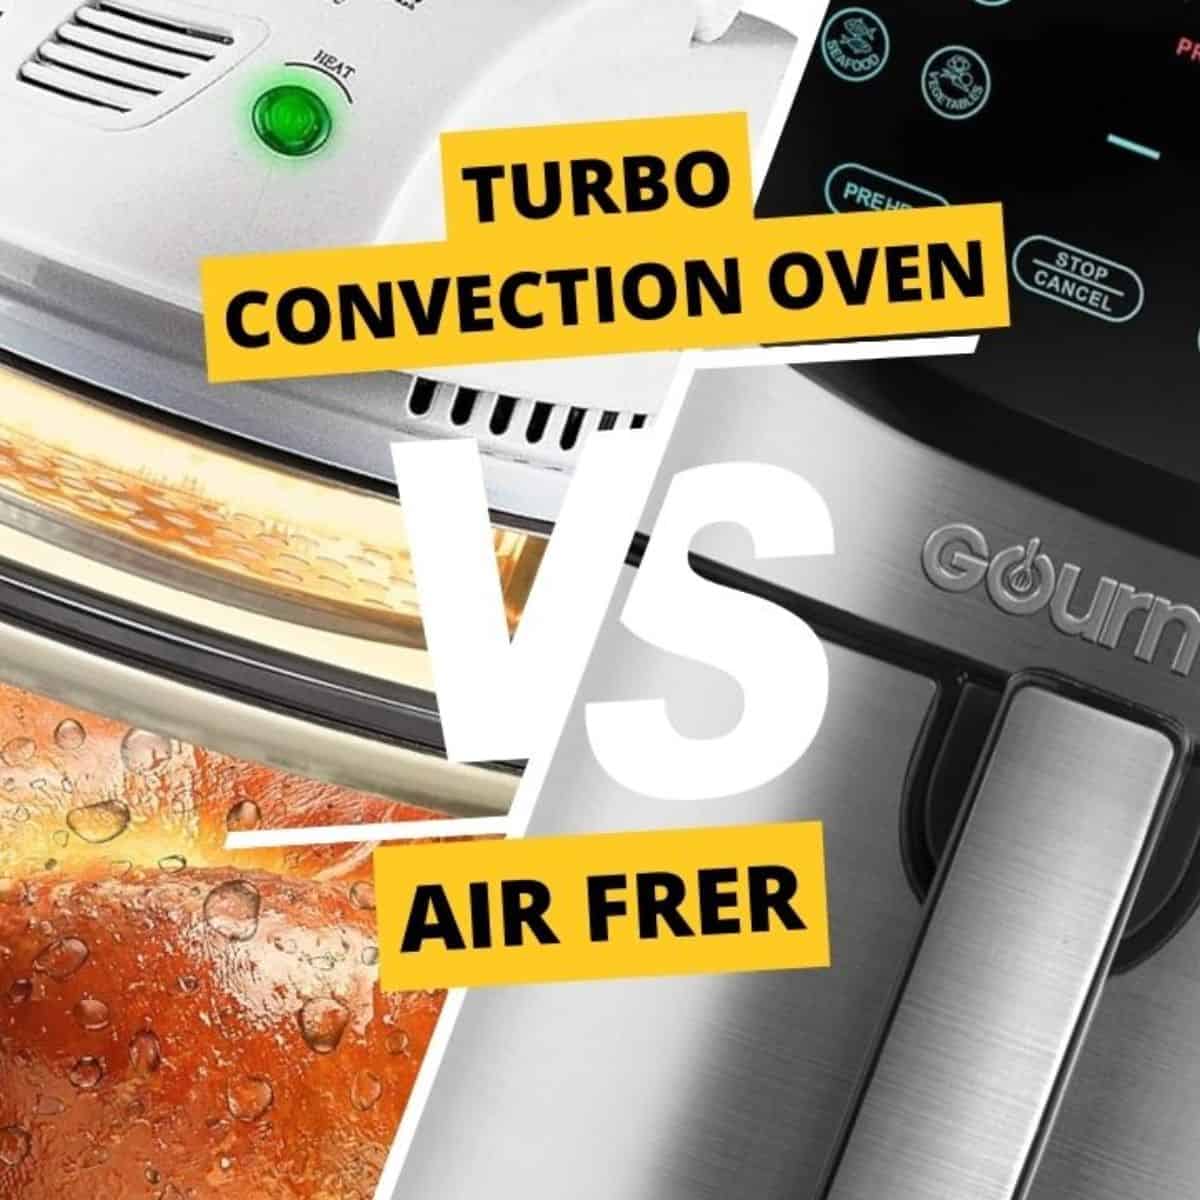 Quality on a Budget? A Cosori Air Fryer 5 QT Review - Also The Crumbs Please